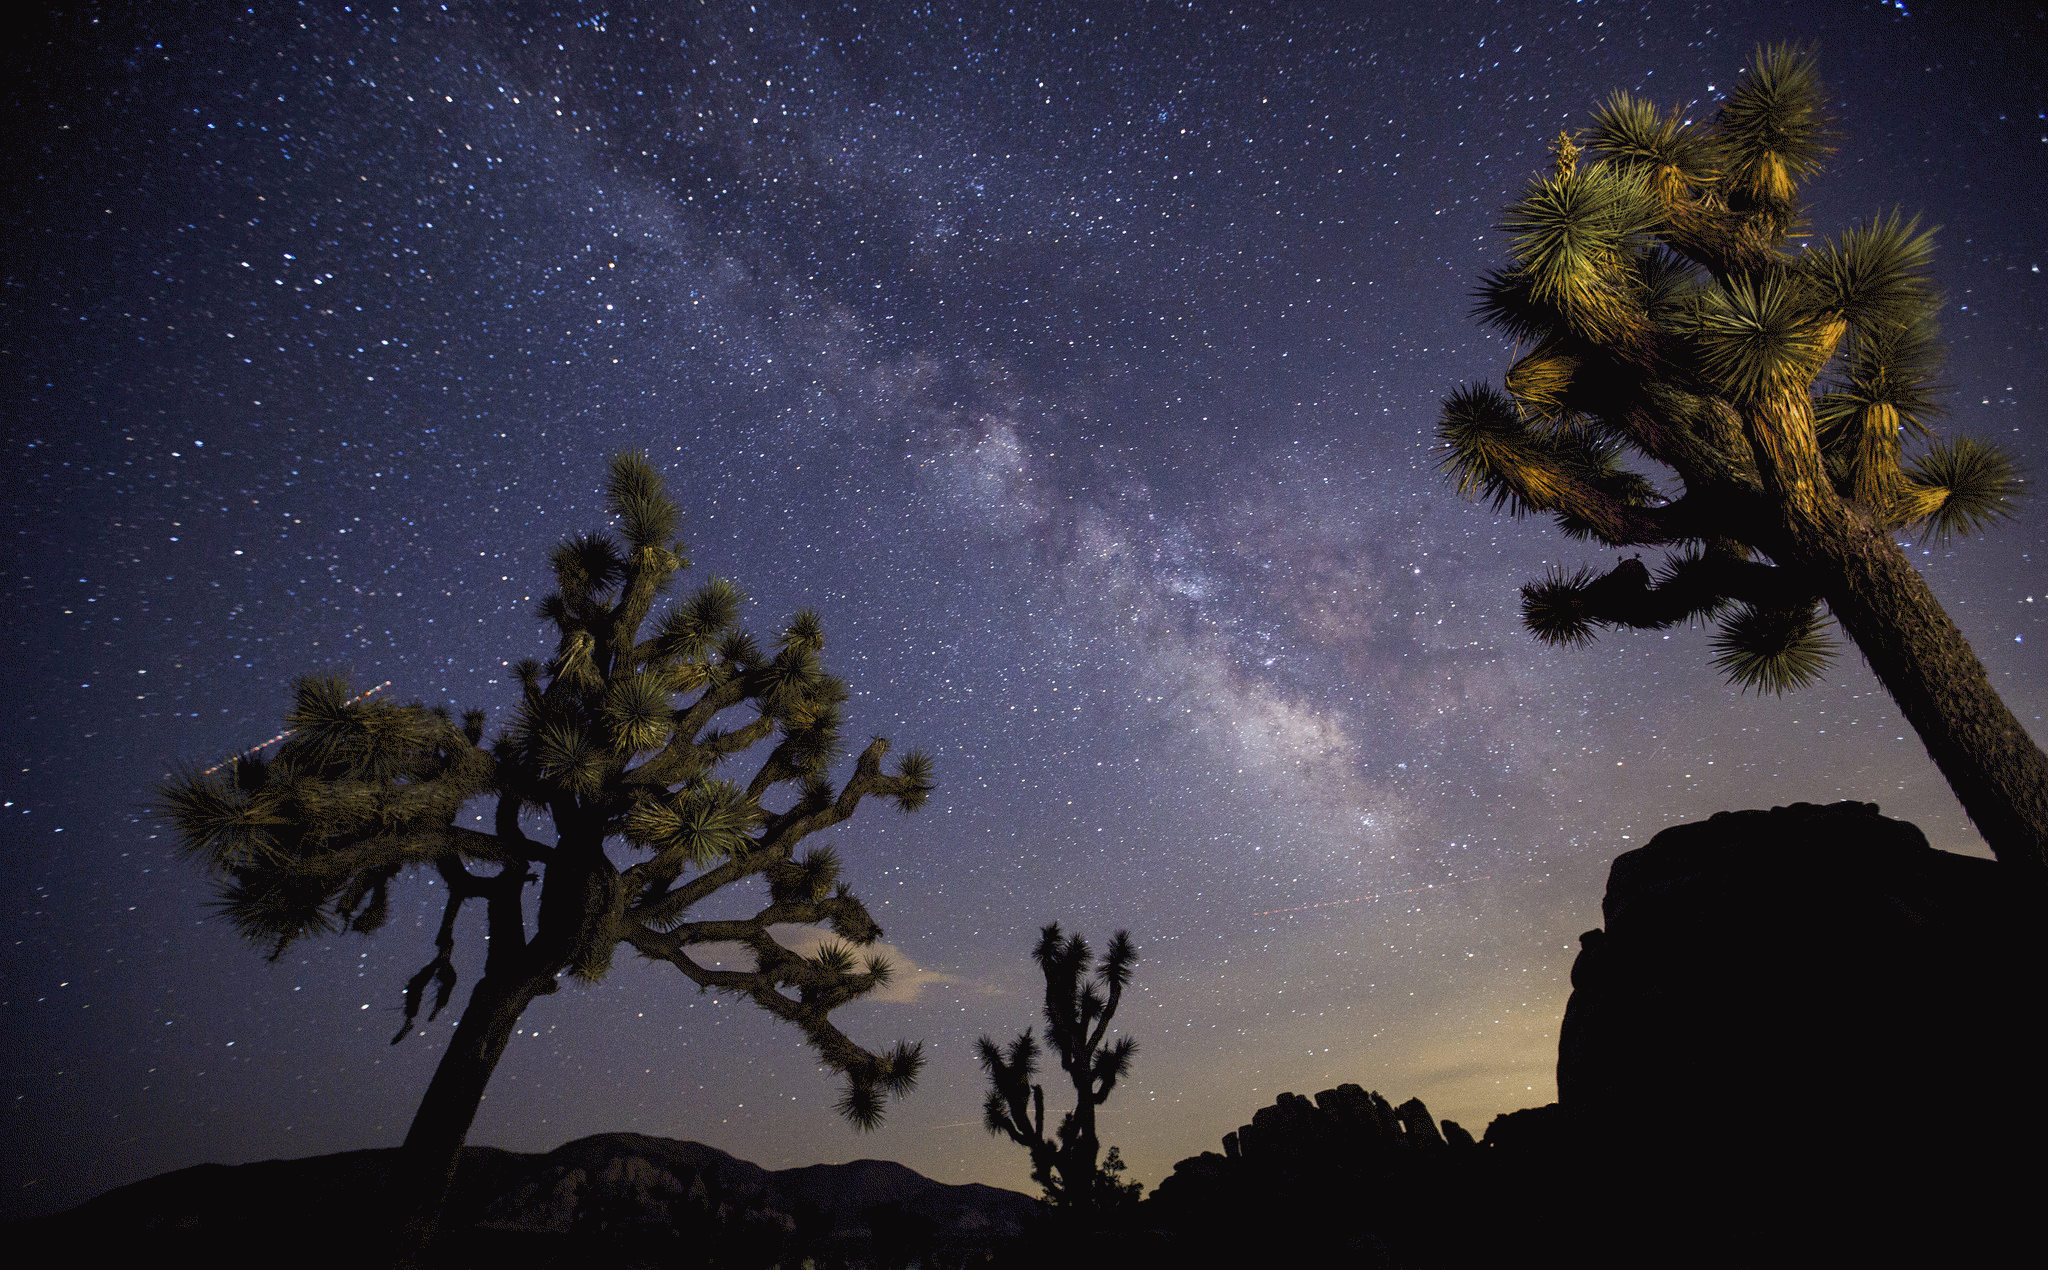 A view of the Milky Way arching over Joshua Trees and rocks at a park campground popular among stargazers in Joshua Tree National Park